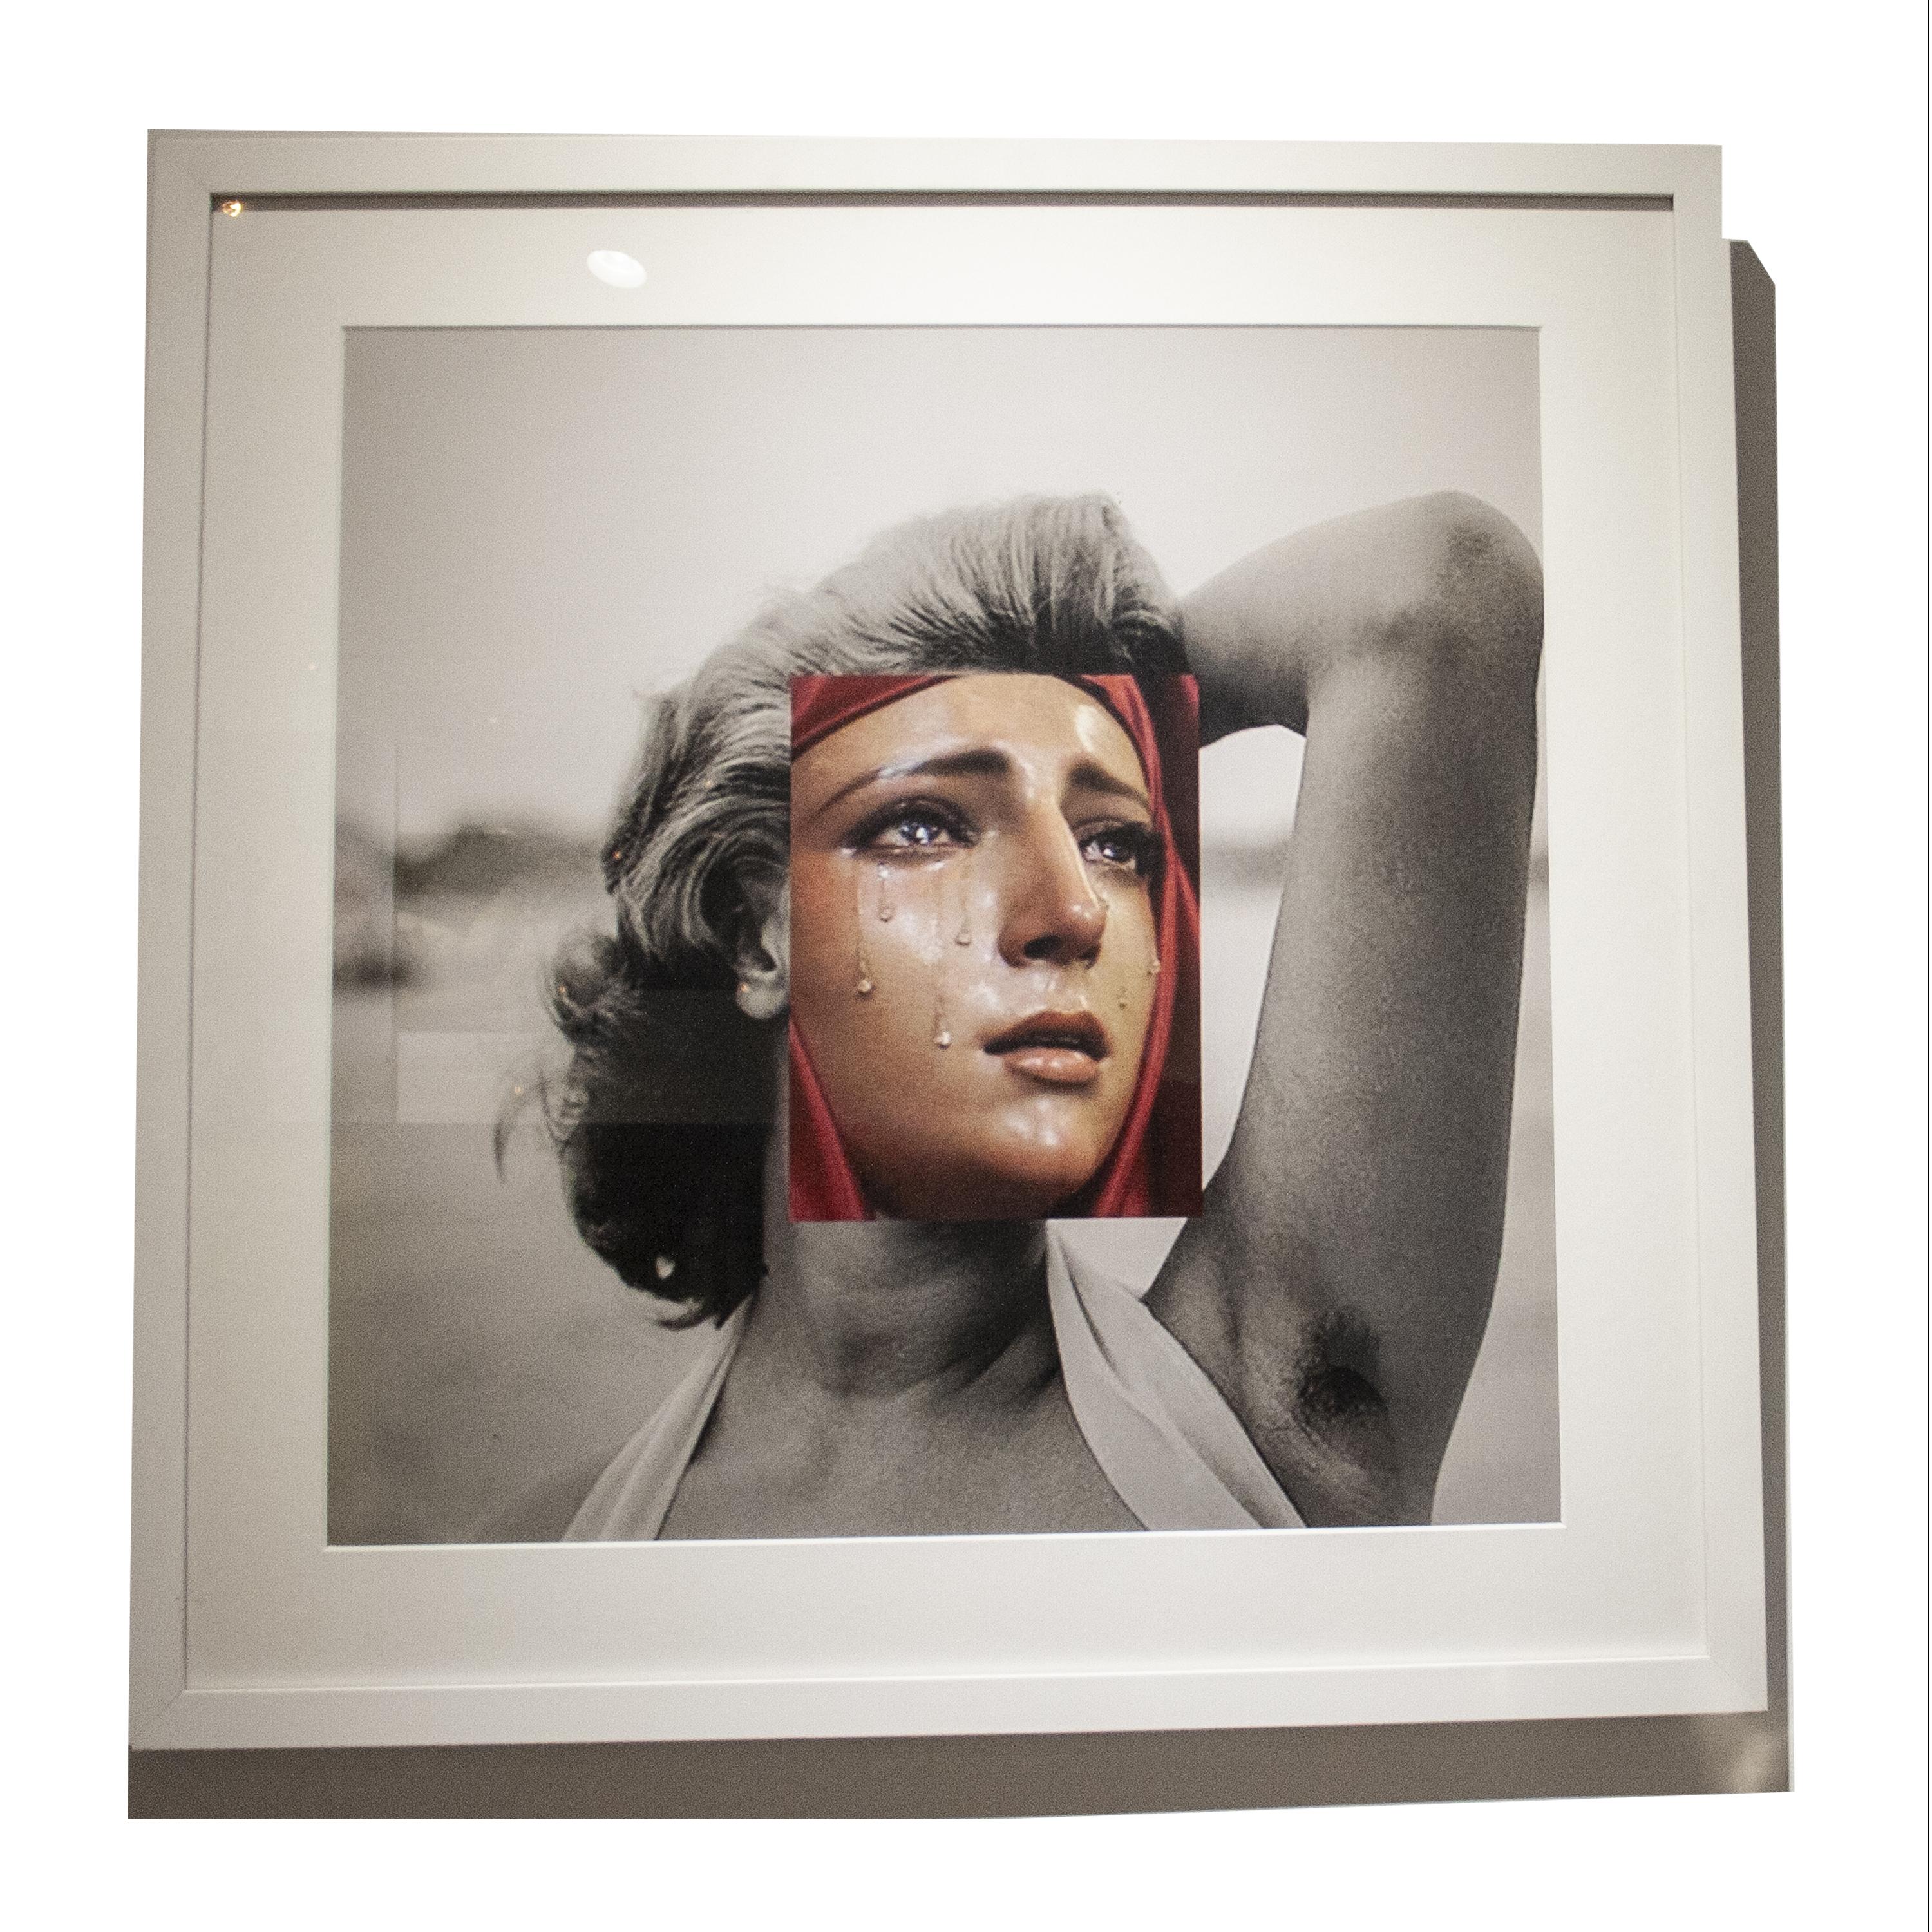 Sophia Loren and Virgin Mary digital collage print by Spanish artist Naro Pinosa, made famous in social media . Authenticity certificated.
Print on photography paper. Glass and white lacquered wooden frame.